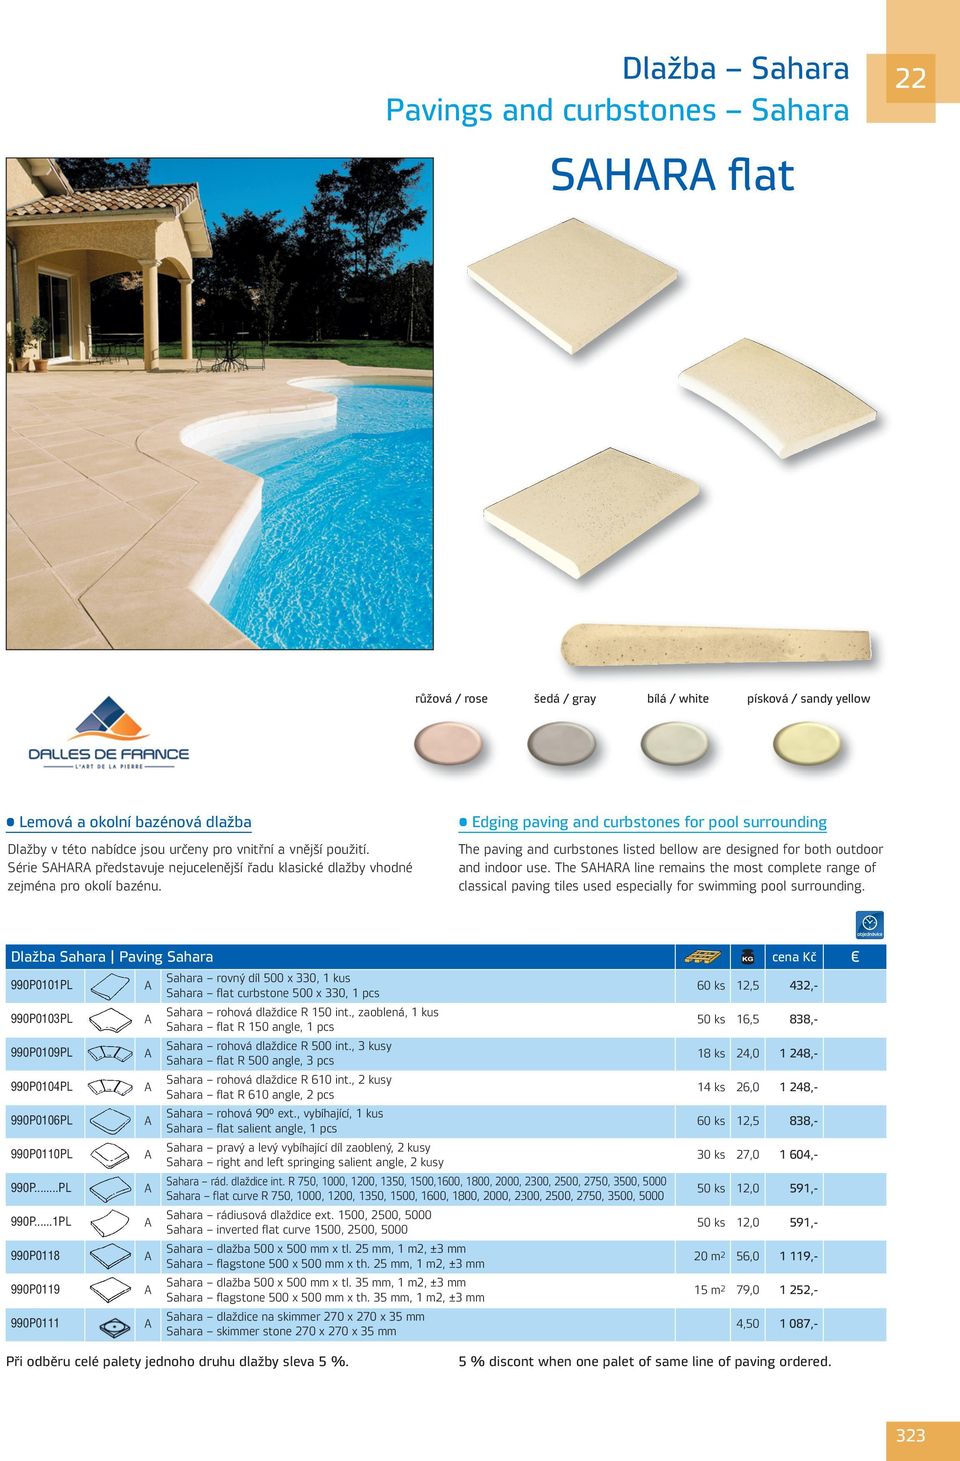 The SHR line remains the most complete range of classical paving tiles used especially for swimming pool surrounding.